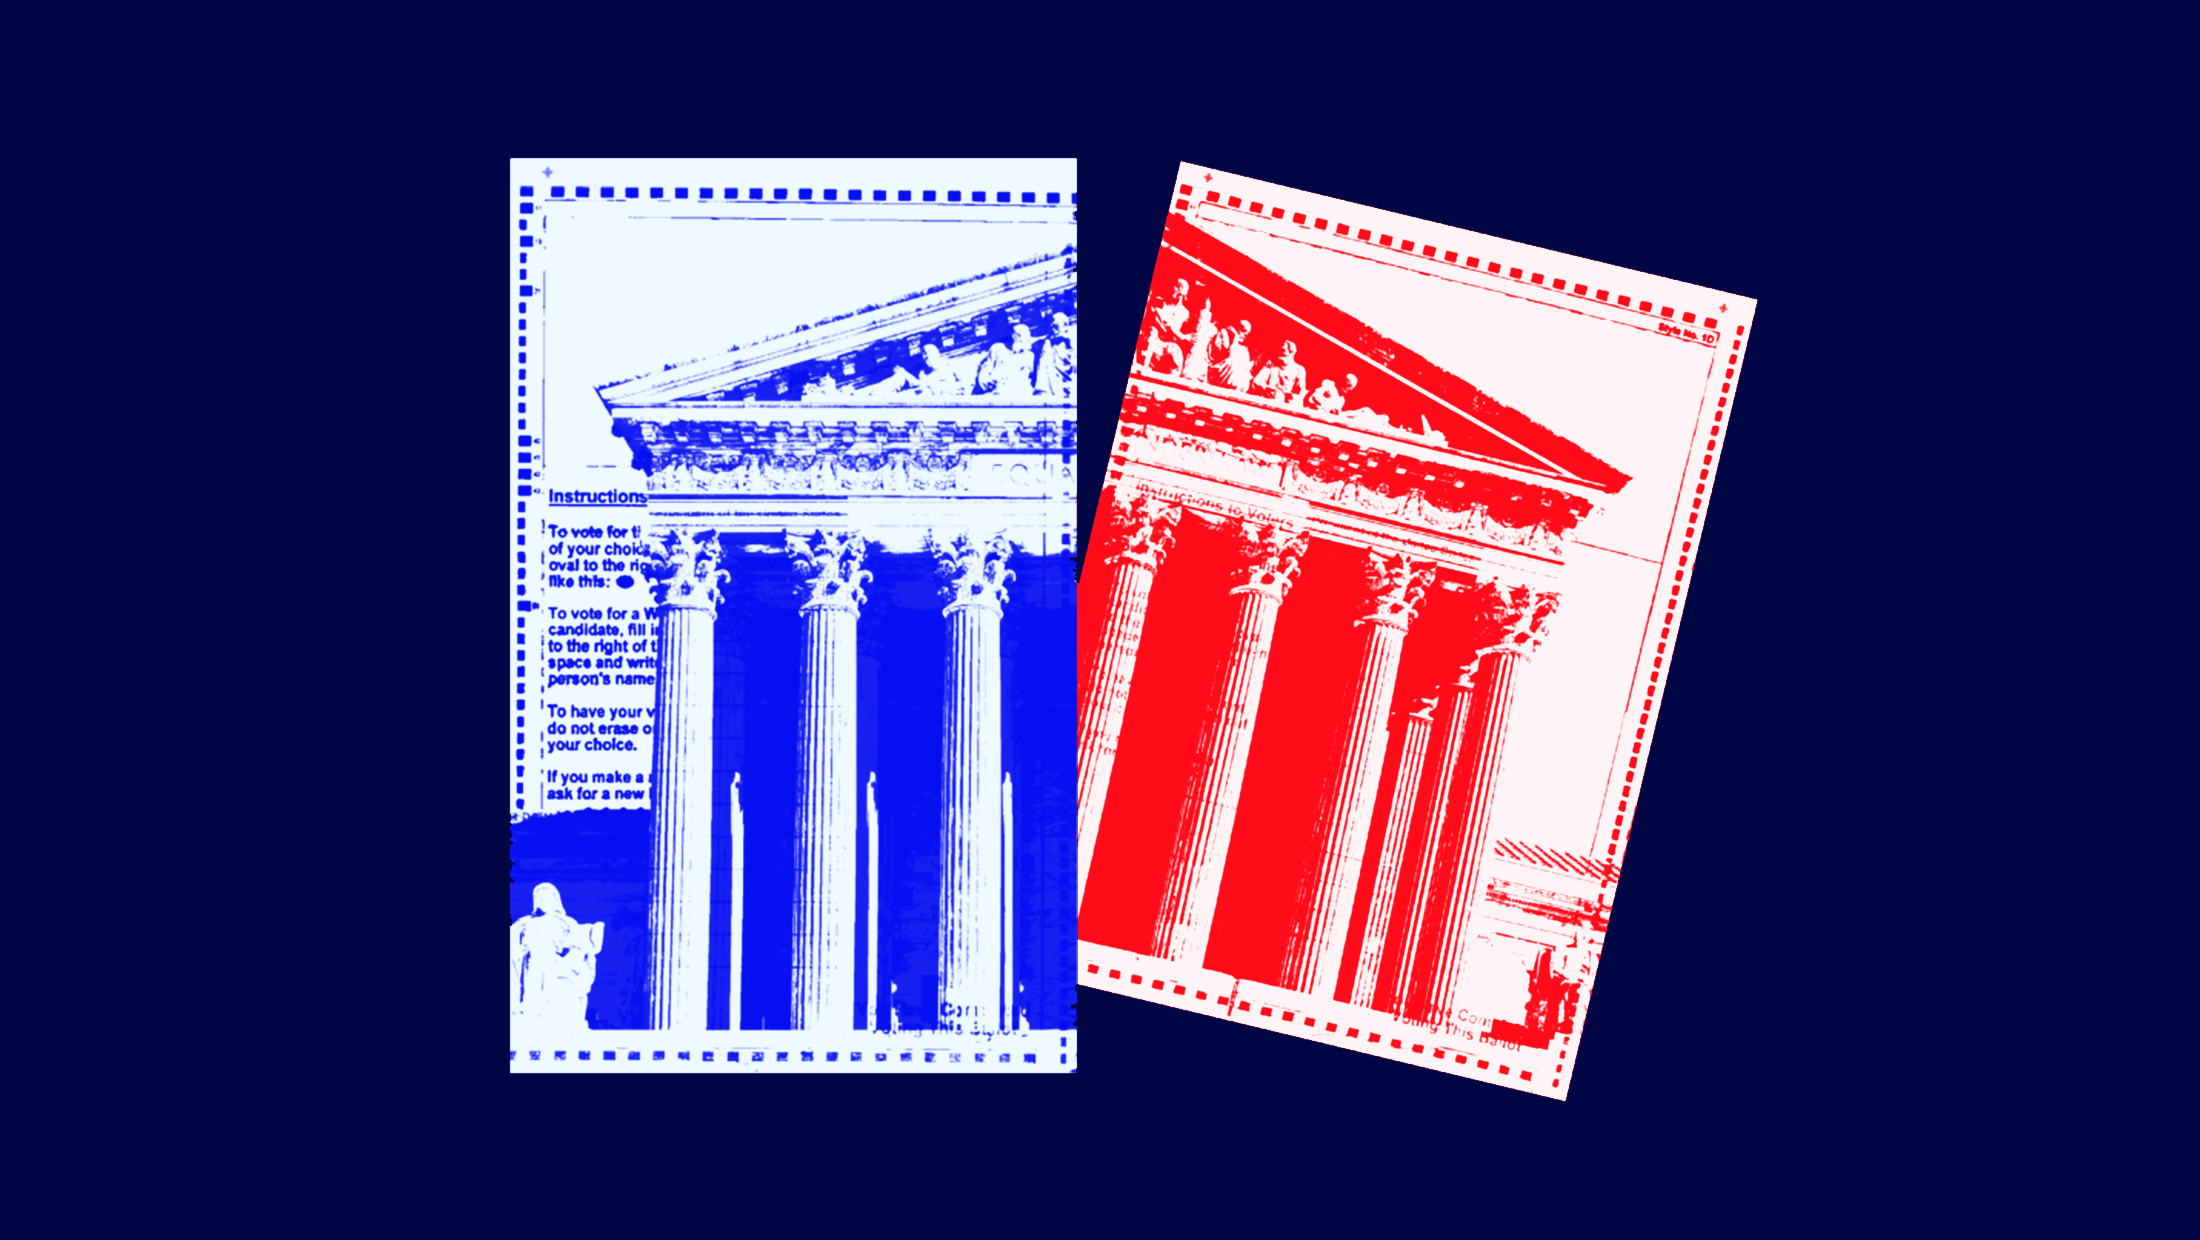 A divided U.S. Supreme Court stretched across two ballots, one ballot is tinted red and the other is tinted blue